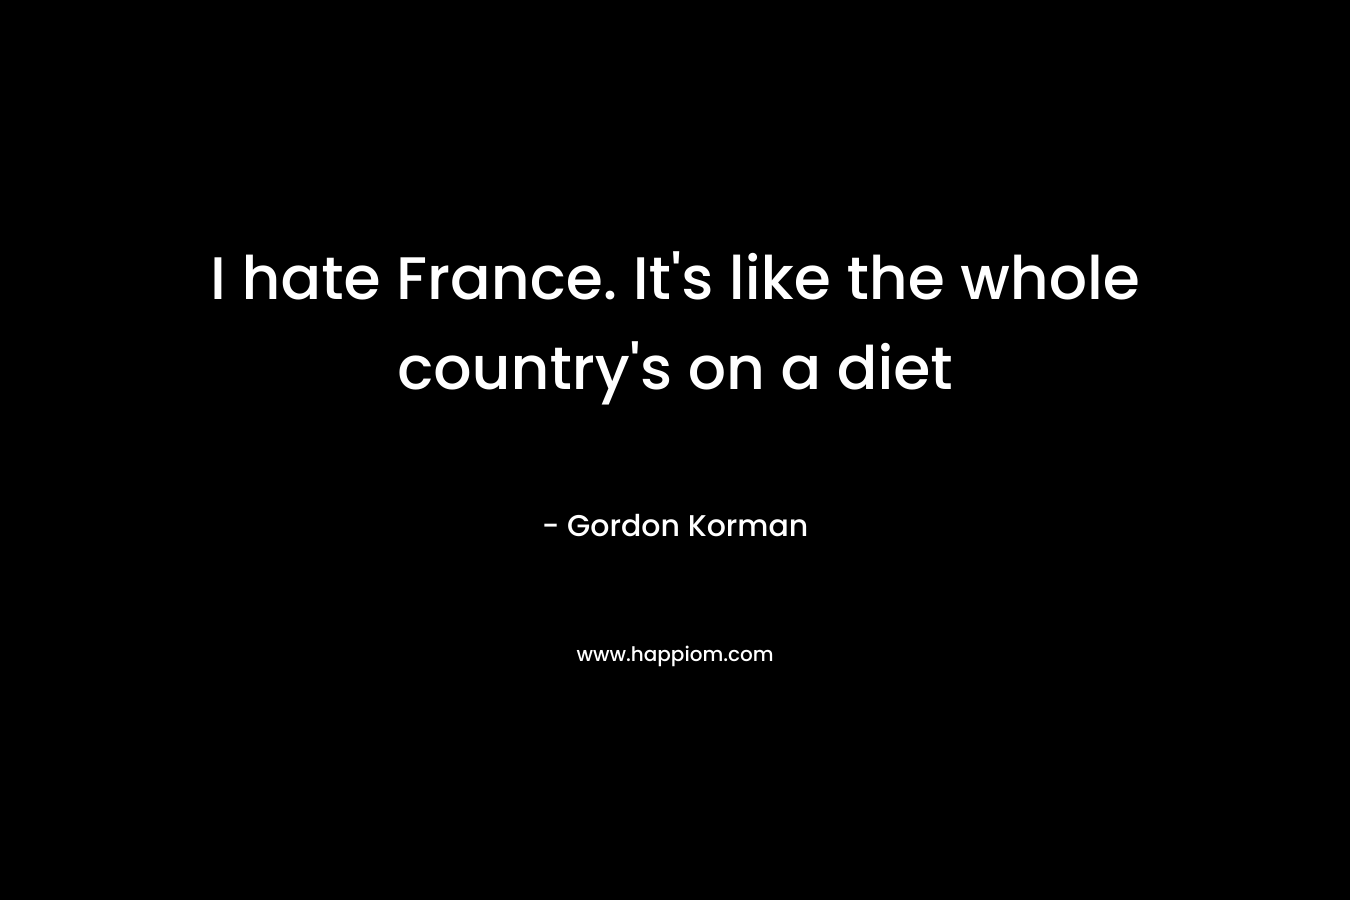 I hate France. It’s like the whole country’s on a diet – Gordon Korman